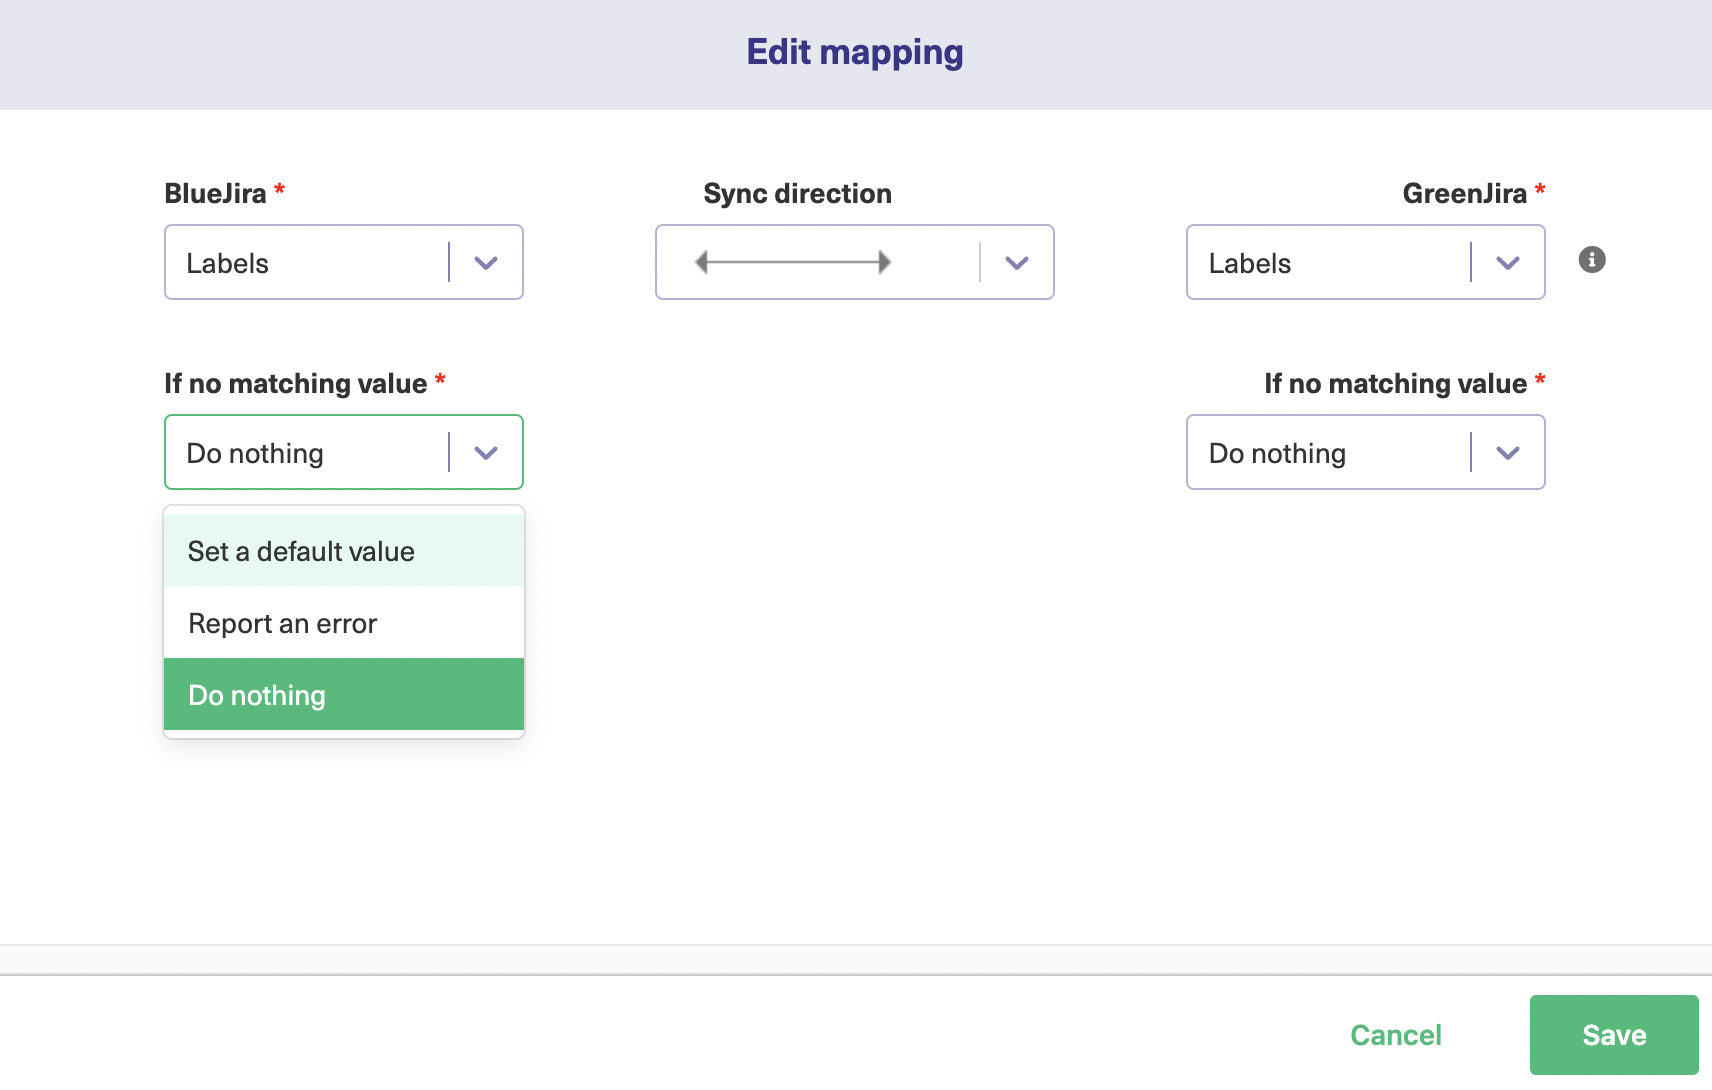 add mapping to jira to jira connection